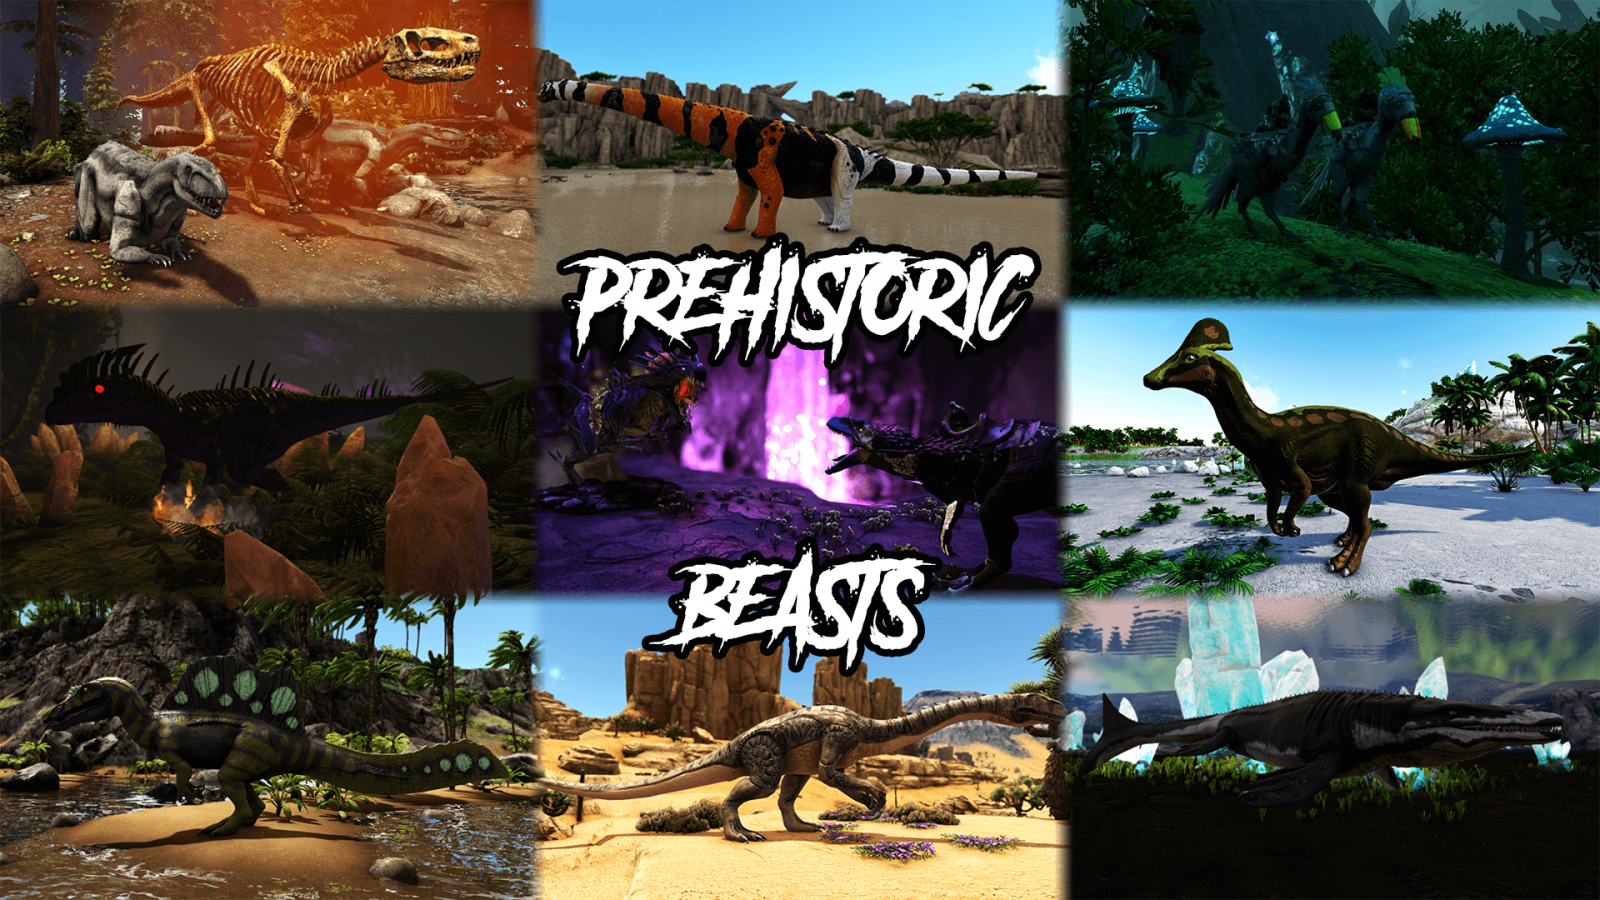 large.1016595226_Prehistoric_Beasts_Mod_Banner(1).png